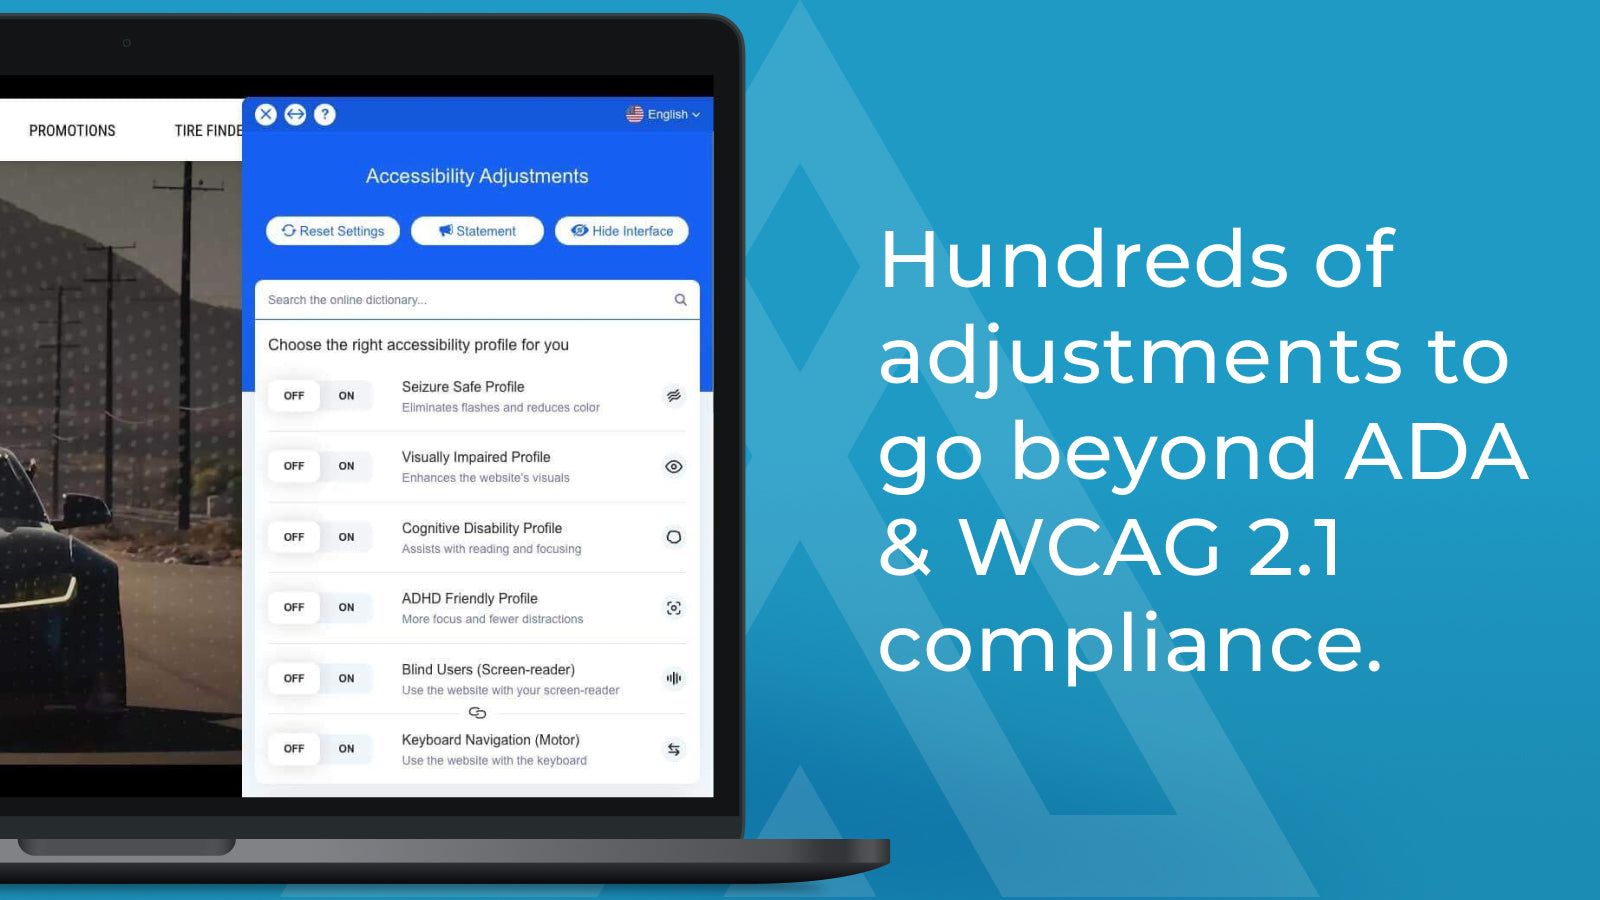 Hundreds of adjustments to go beyond ADA & WCAG 2.1 compliance.